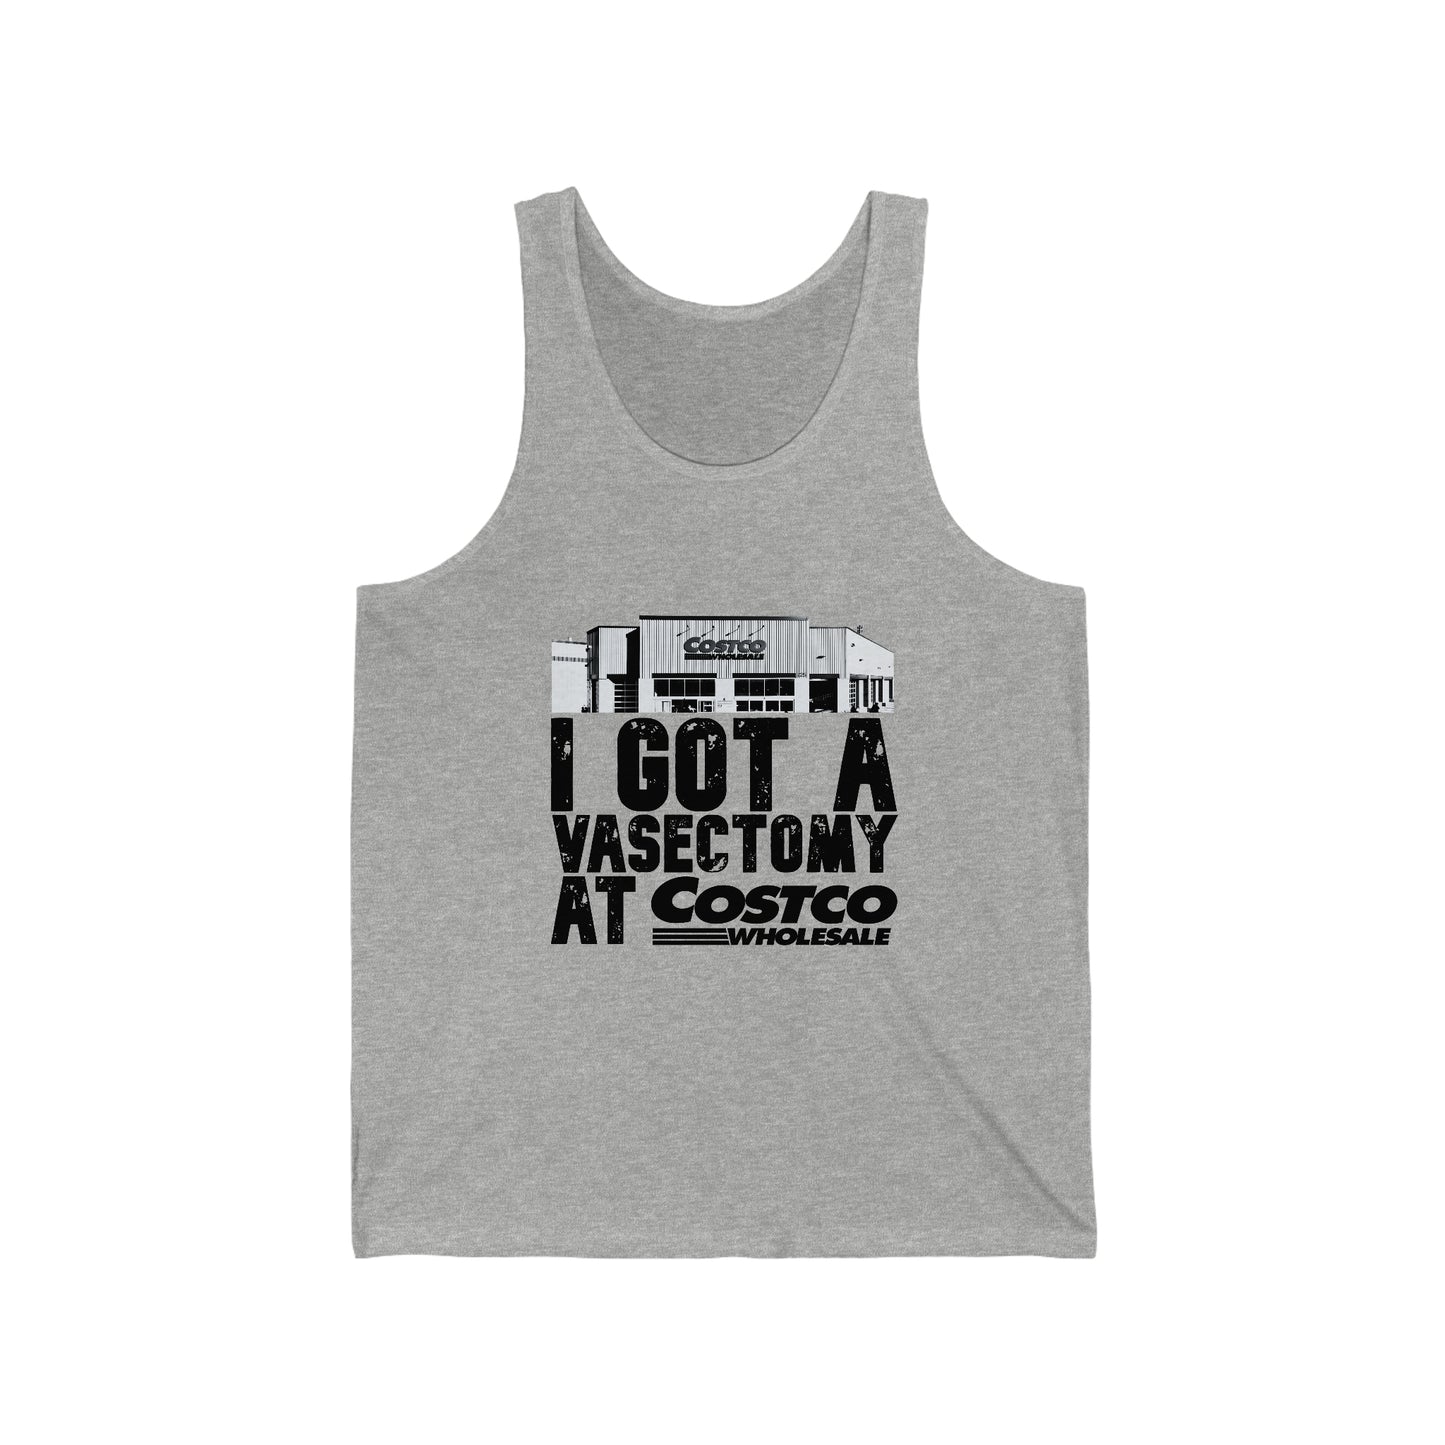 I got a vasectomy at costco - Unisex Jersey Tank